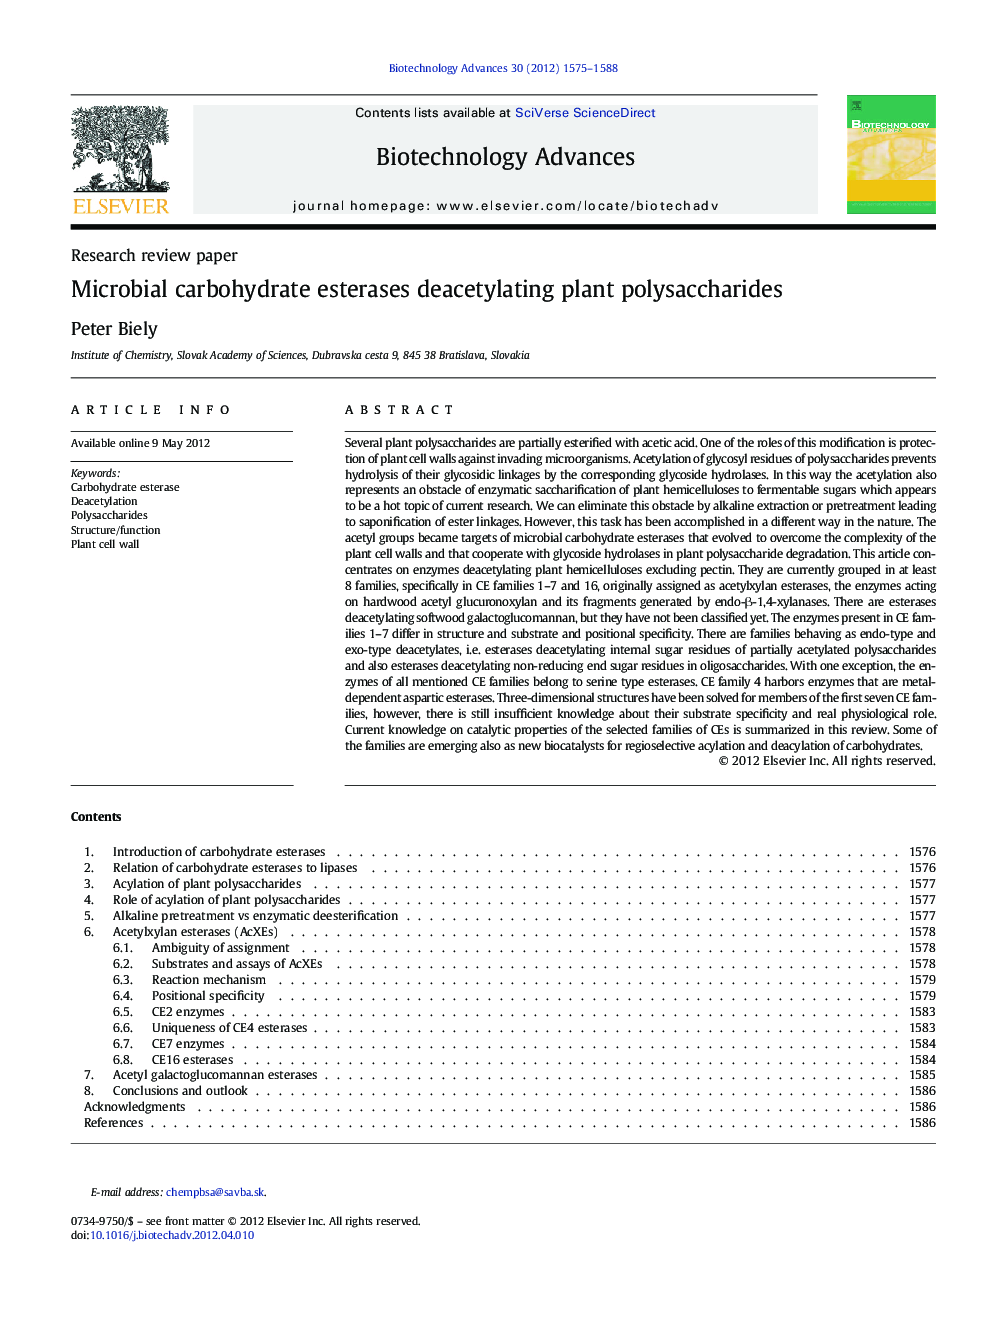 Microbial carbohydrate esterases deacetylating plant polysaccharides